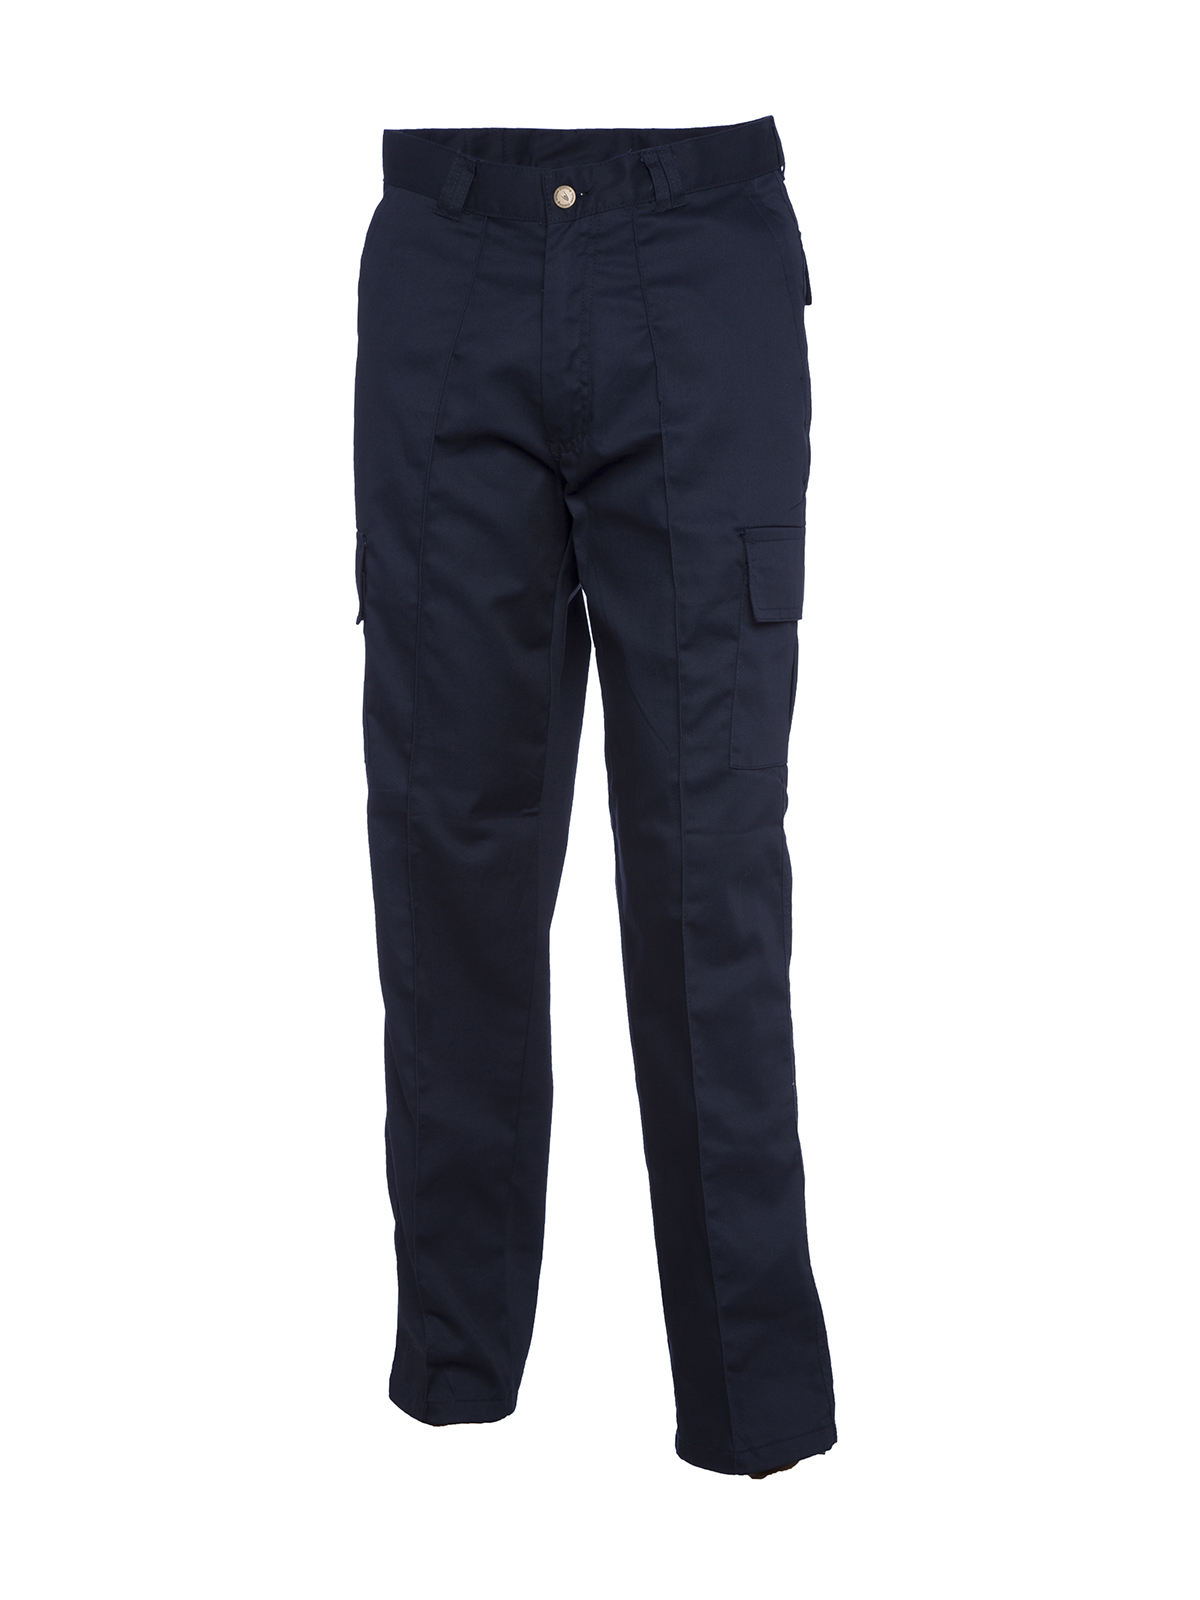 Cargo Trousers, Navy Blue - 48S